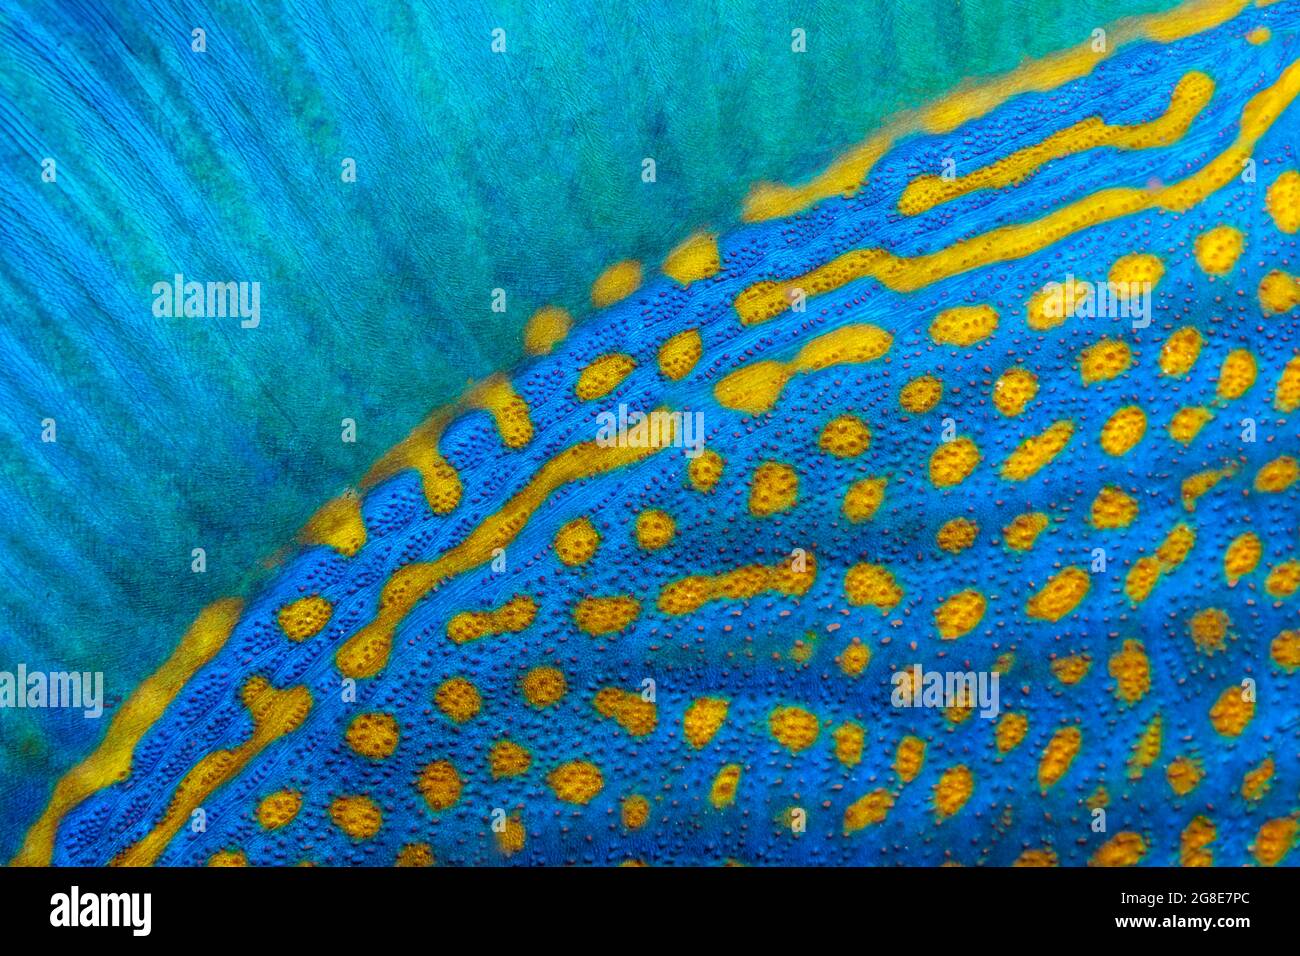 Dorsal fin and scales of blue stripe triggerfish (Pseudobalistes fuscus), detail, Red Sea, Fury Shoals, Egypt Stock Photo